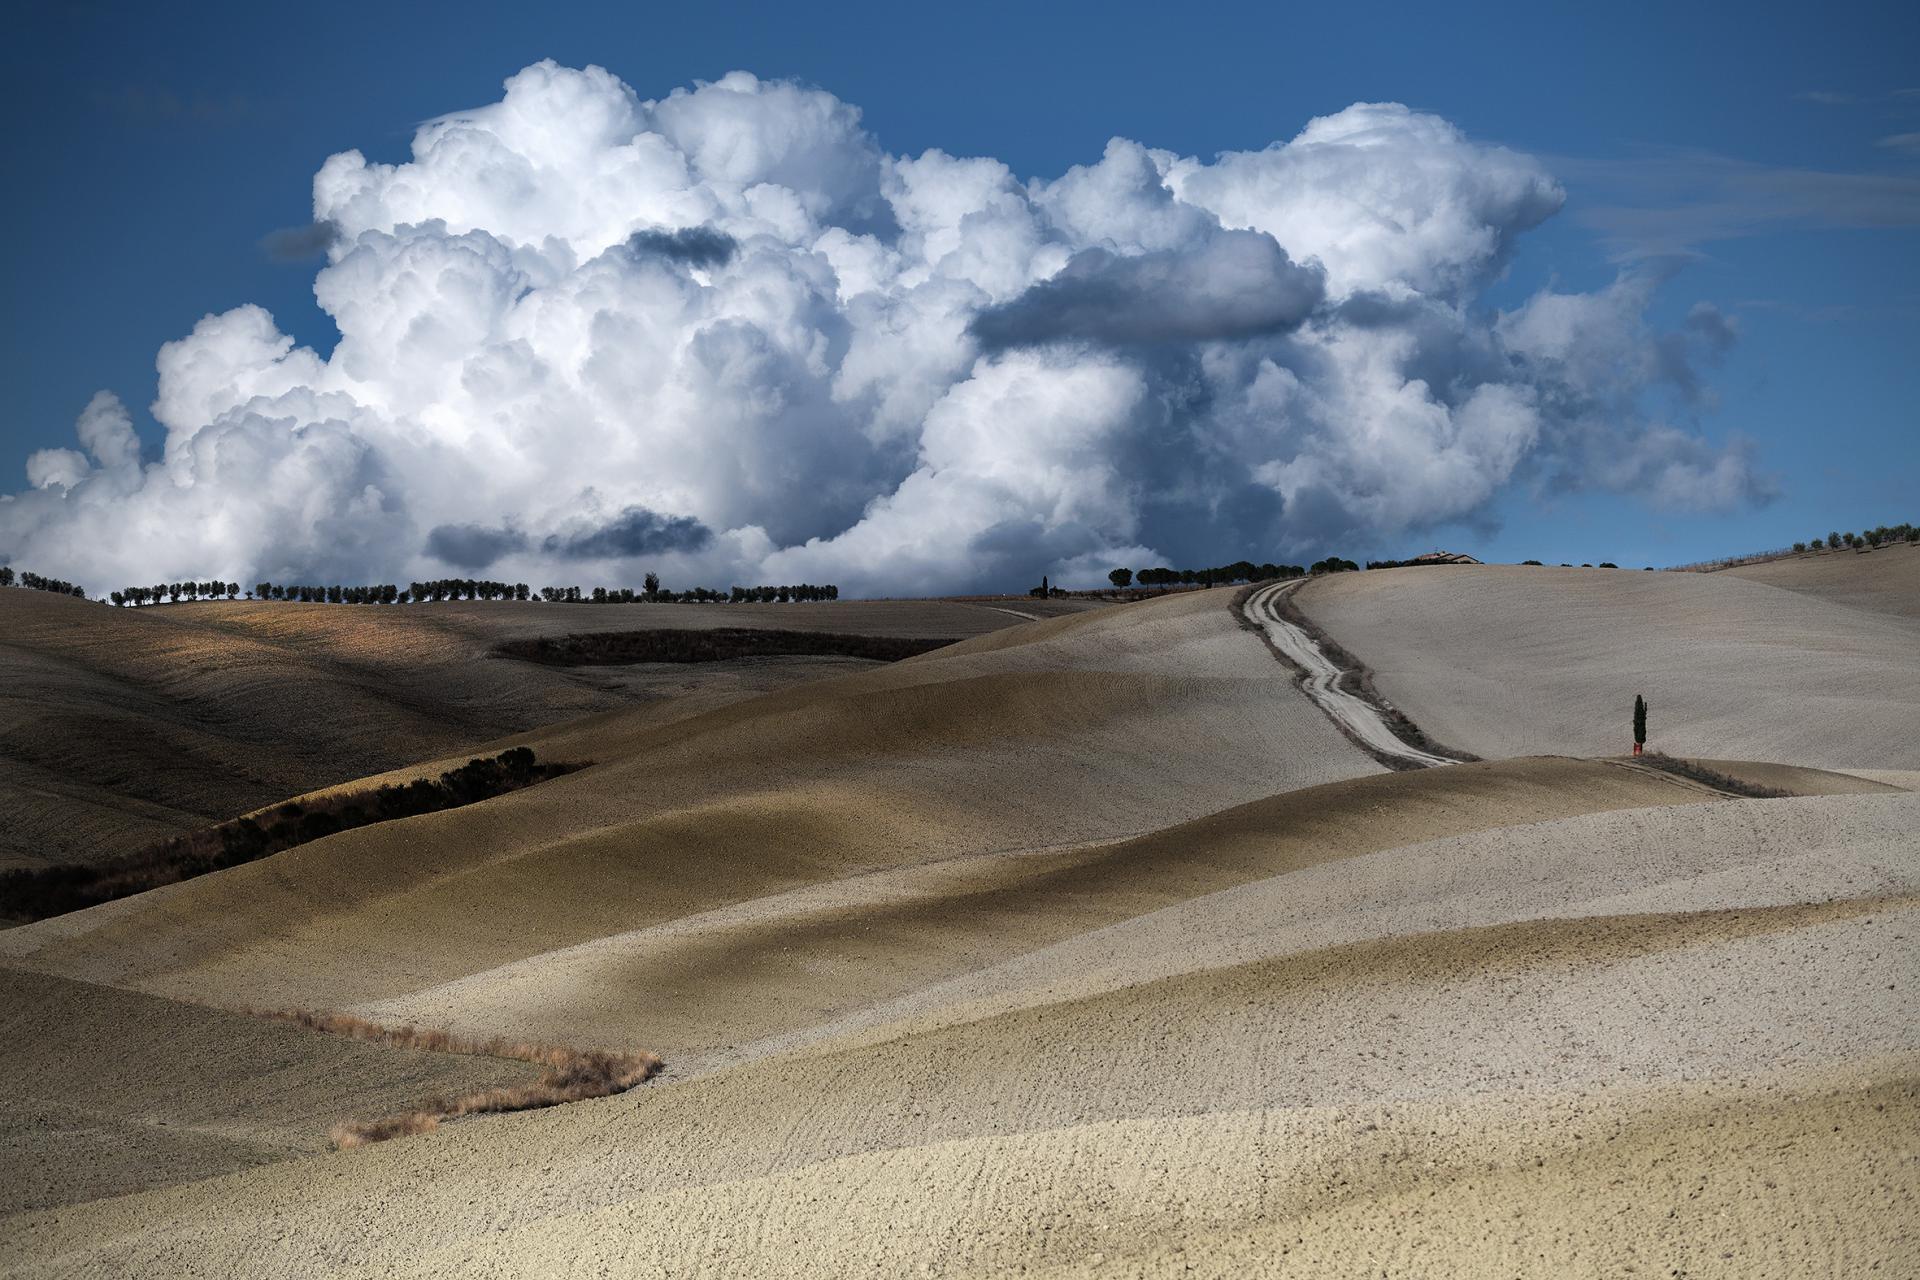 London Photography Awards Winner - Val d'Orcia Land in Autumn